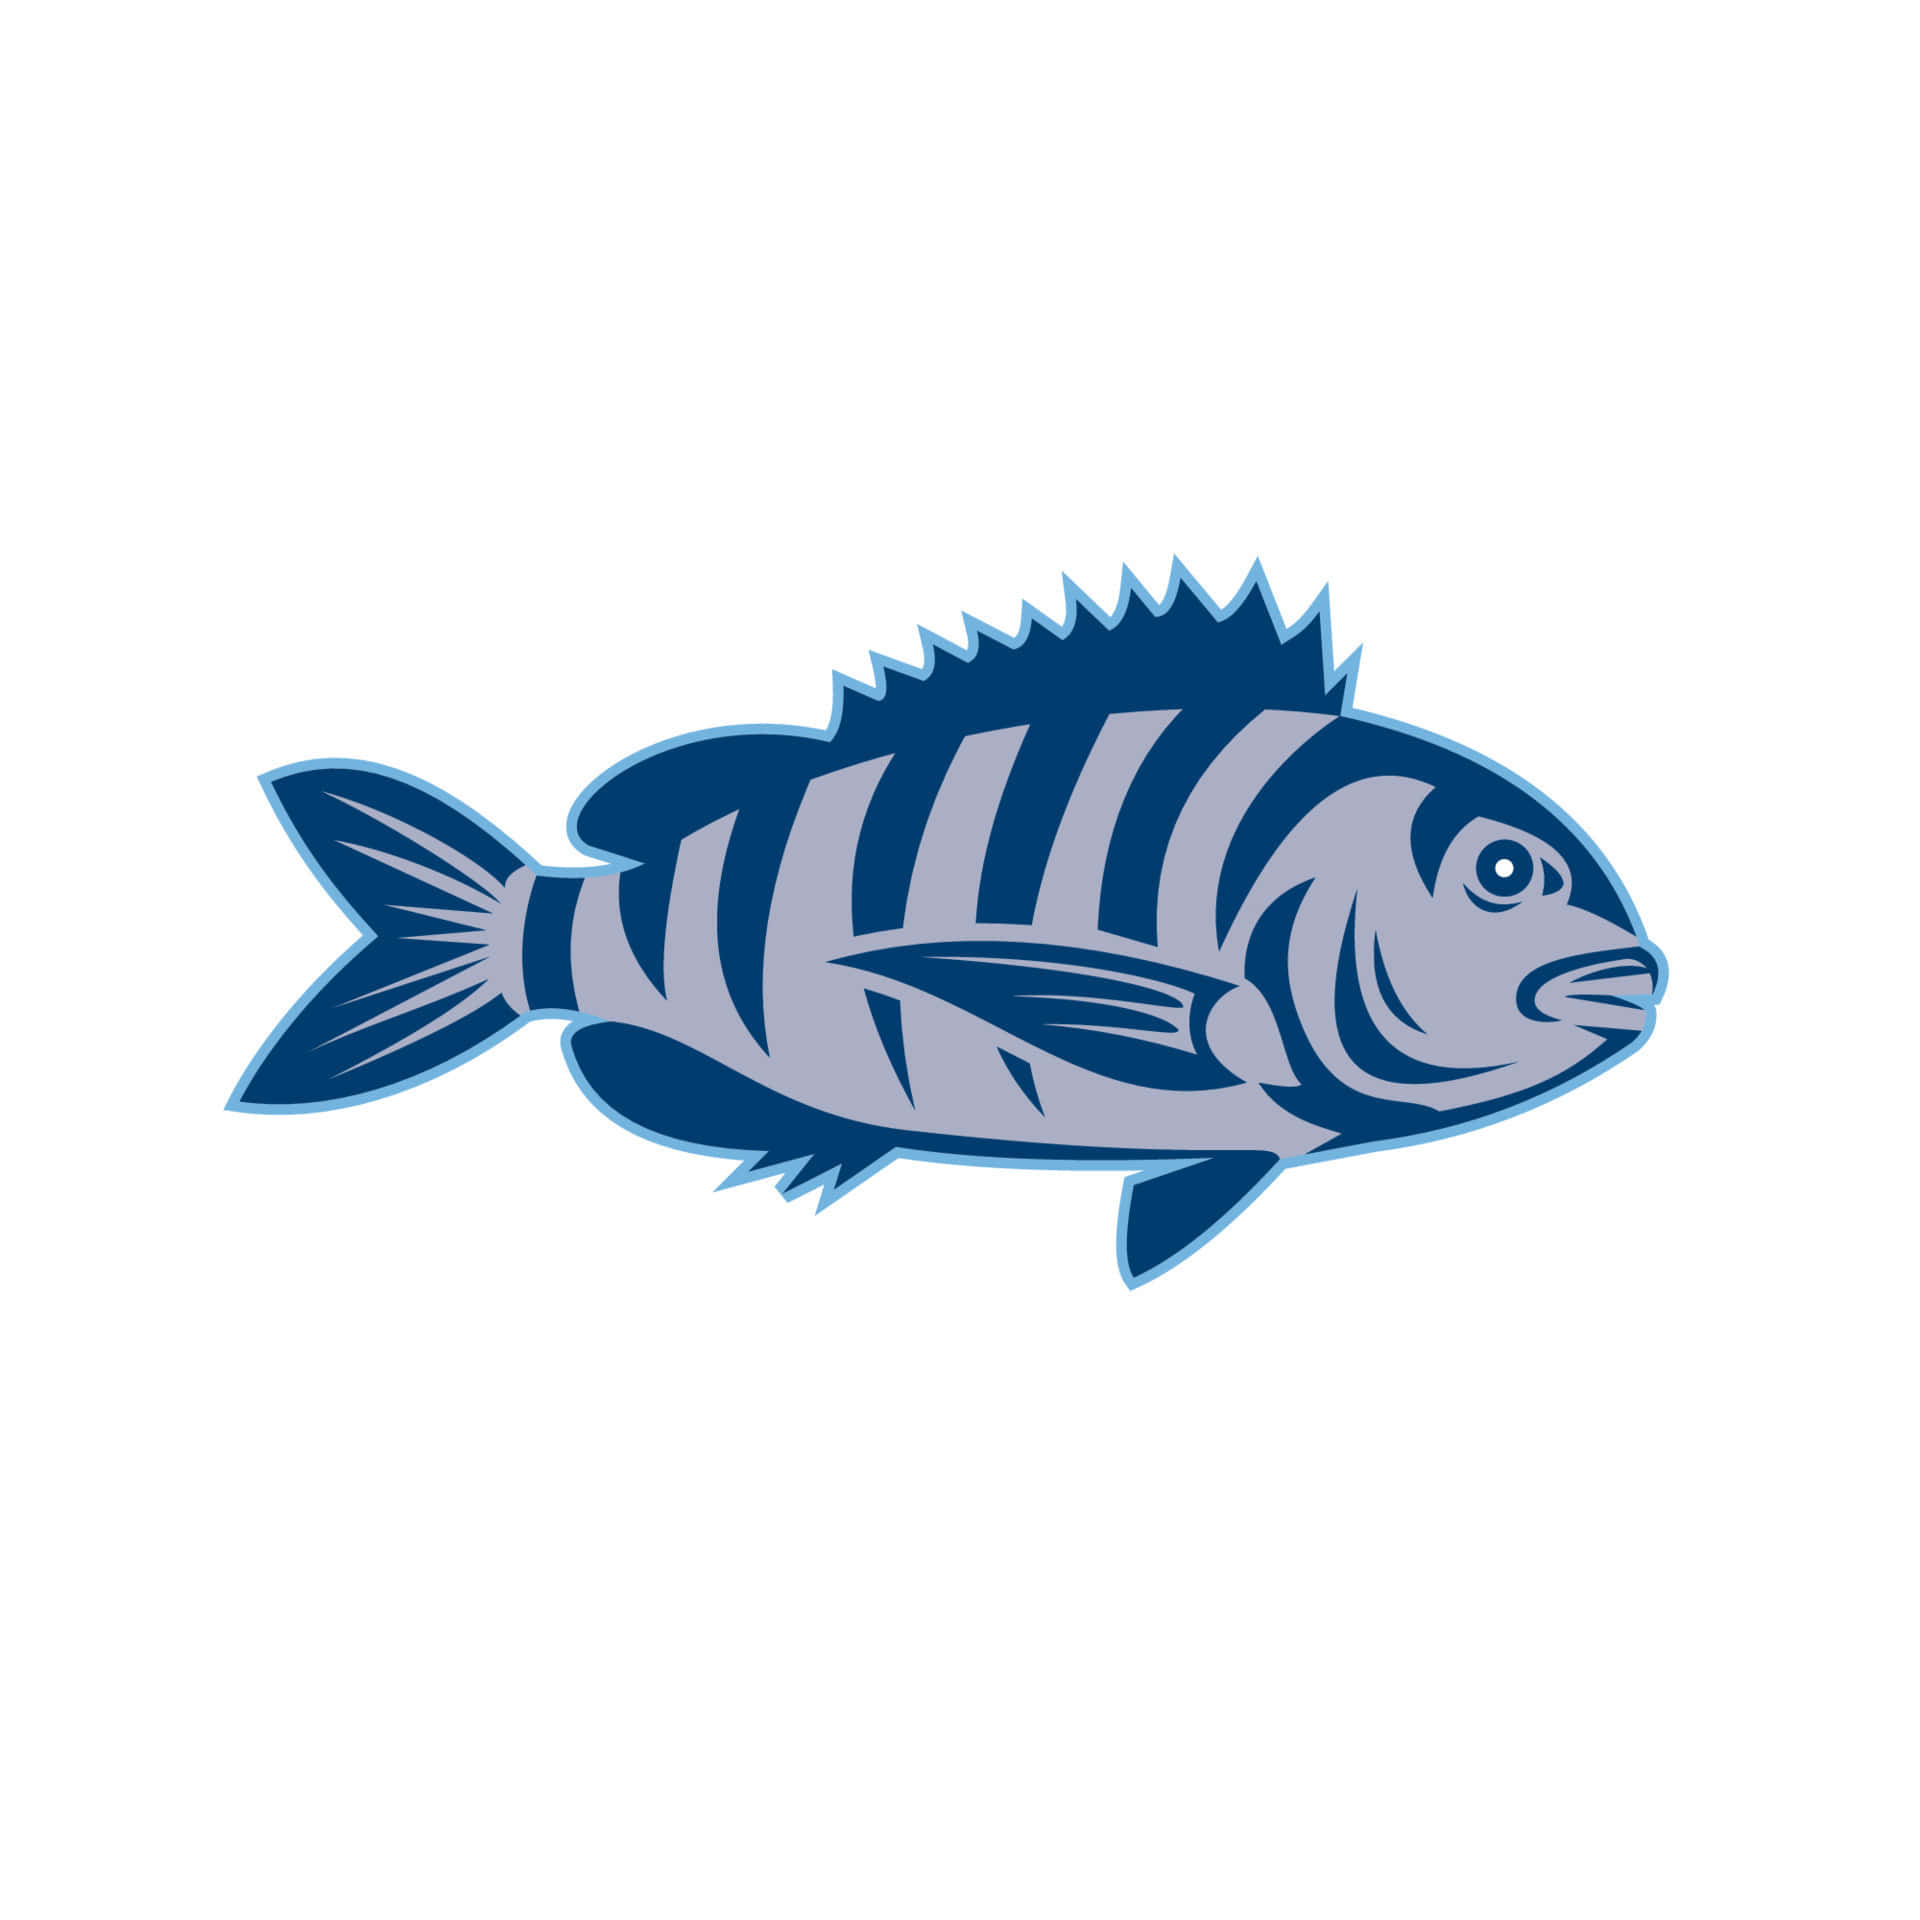 A Fish Logo With Blue Stripes On A White Background